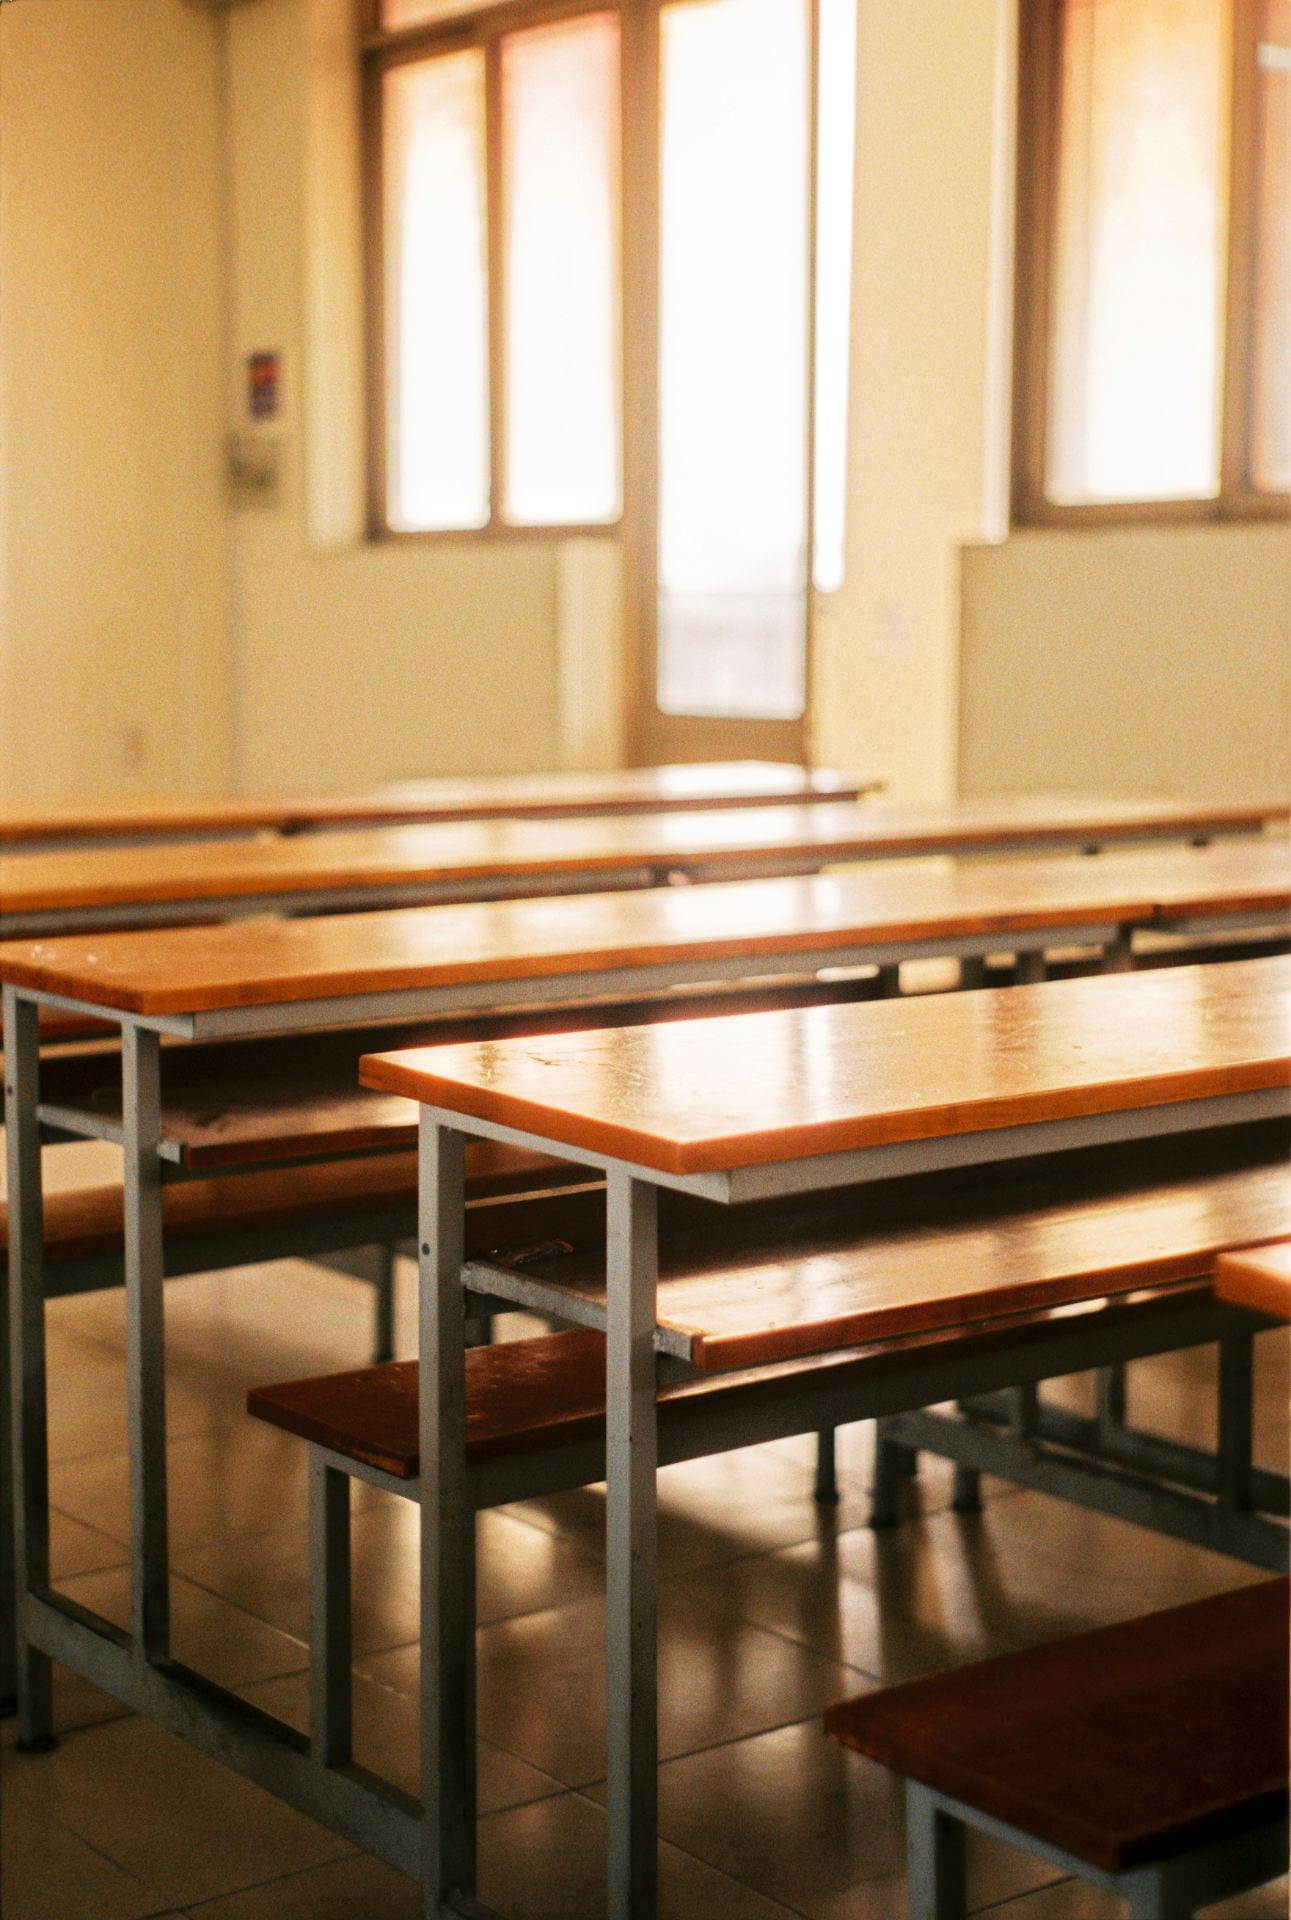 The image depicts rows of wooden benches in a well-lit classroom. 